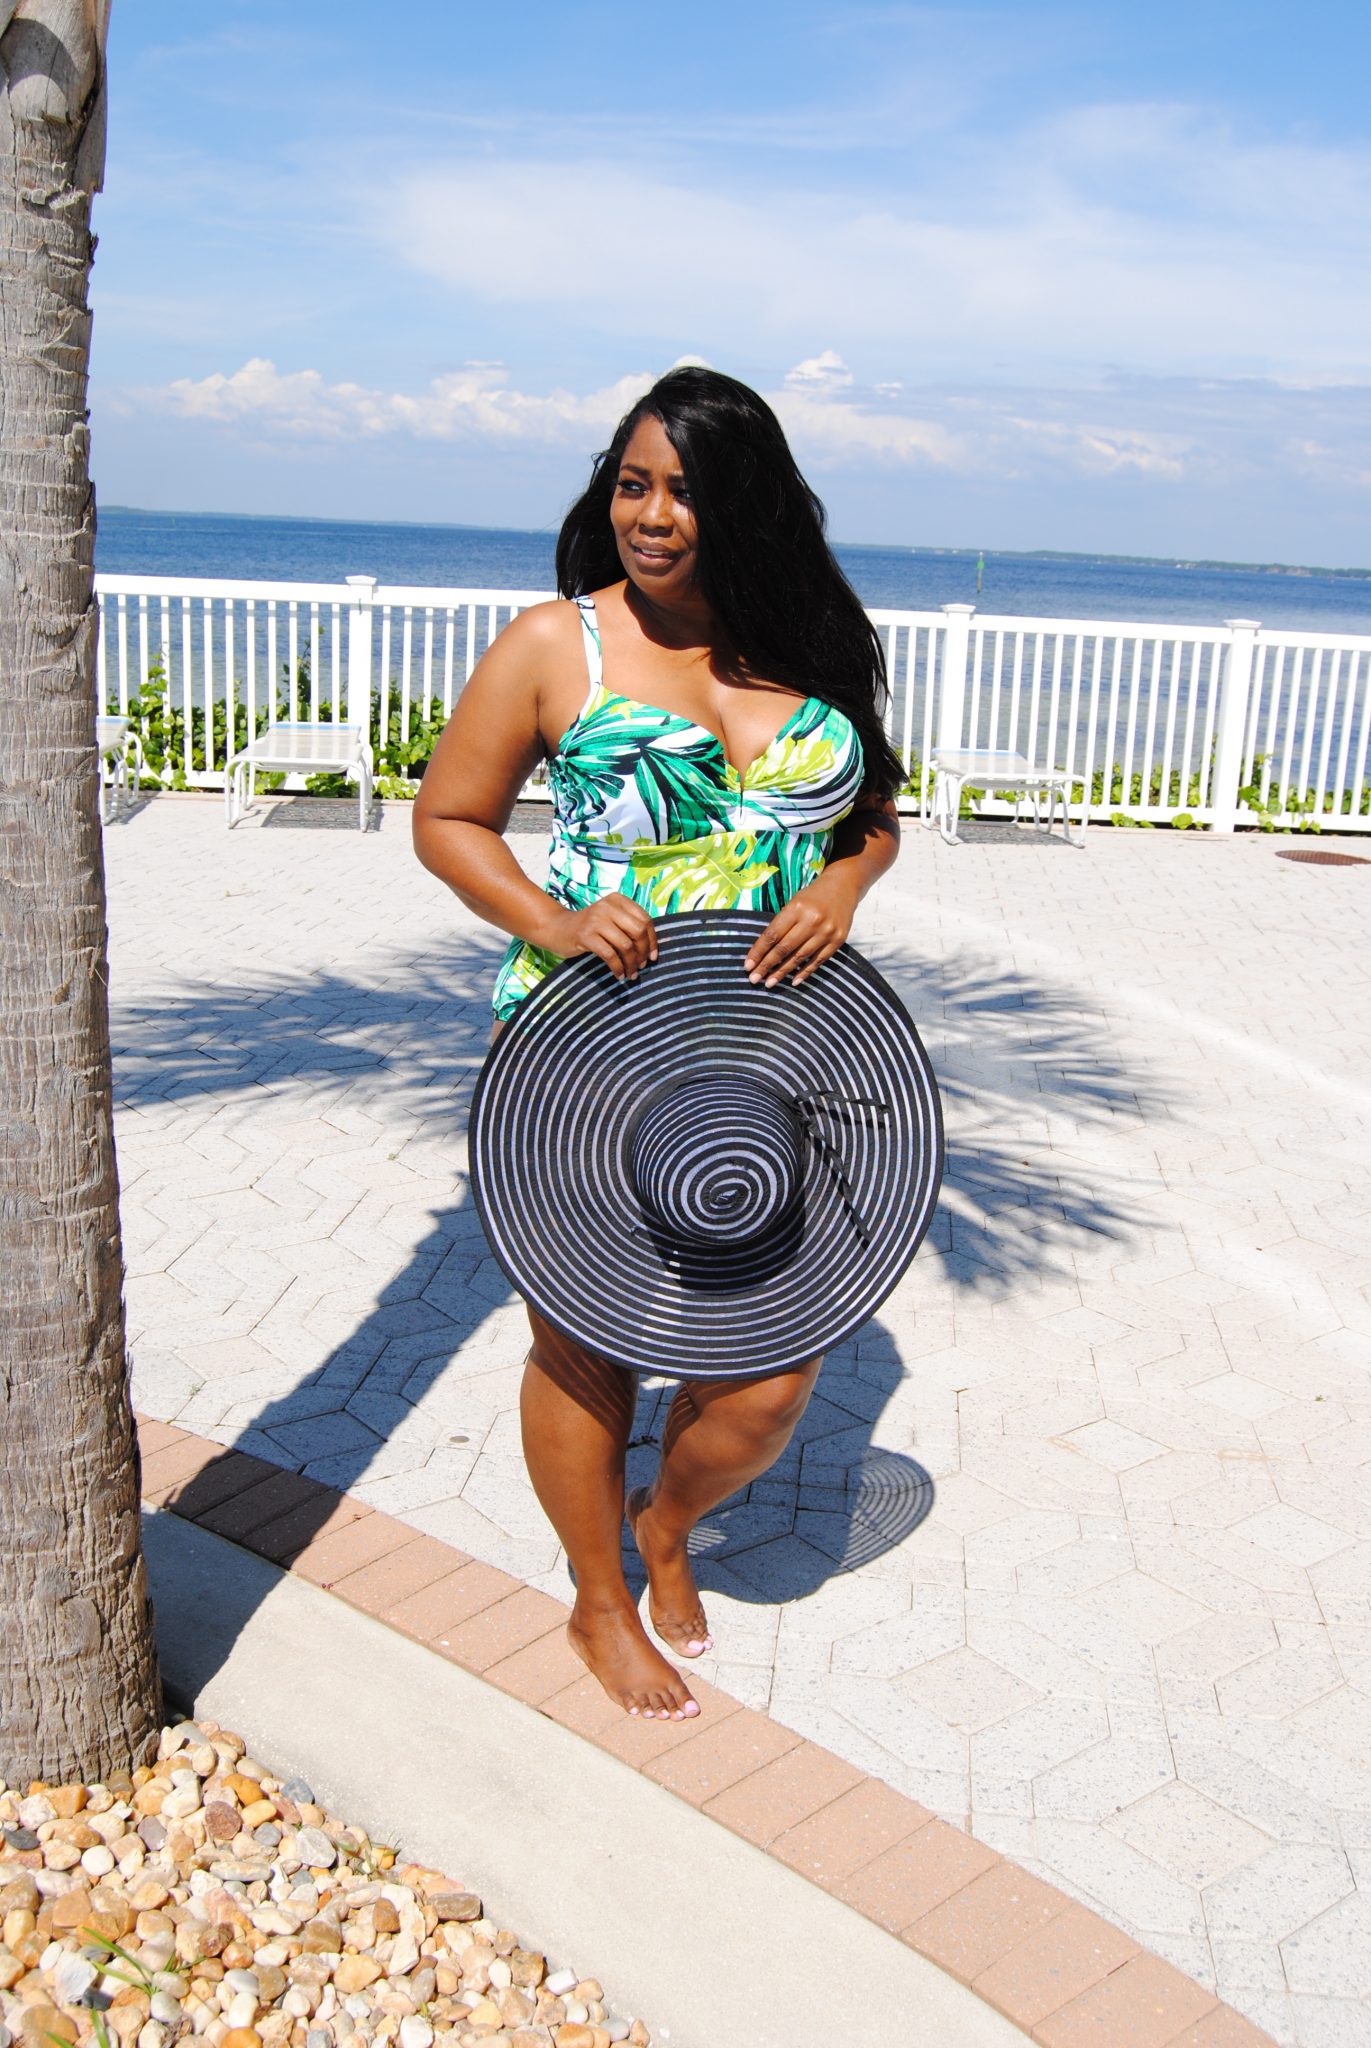 My Top Ten ‘Curvy Girl’ Swimsuits For Summer